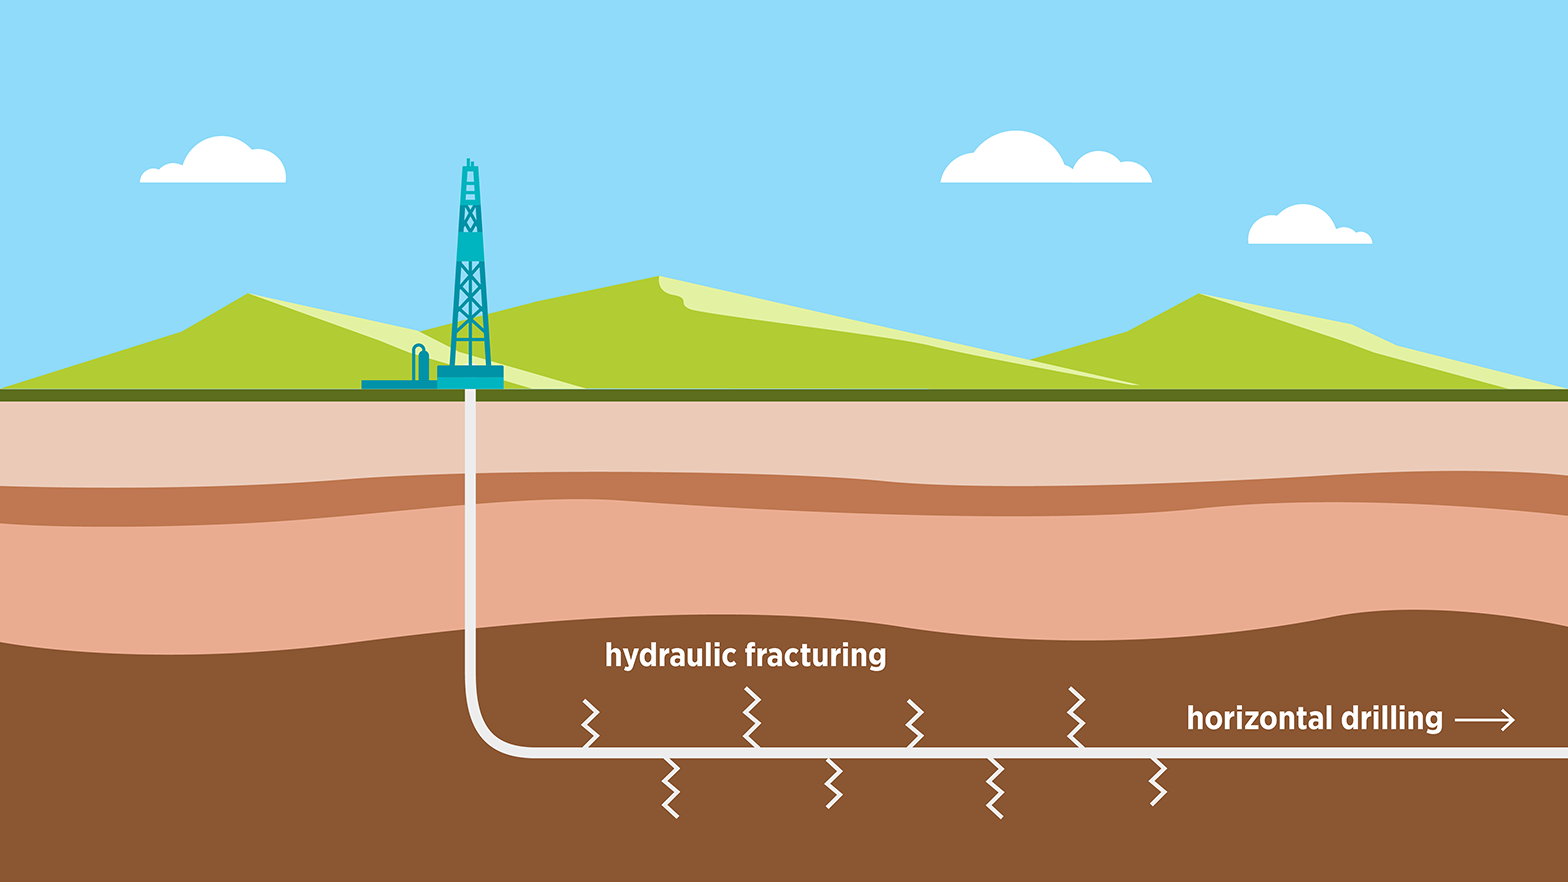 illustration: hydraulic fracturing and horizontal drilling